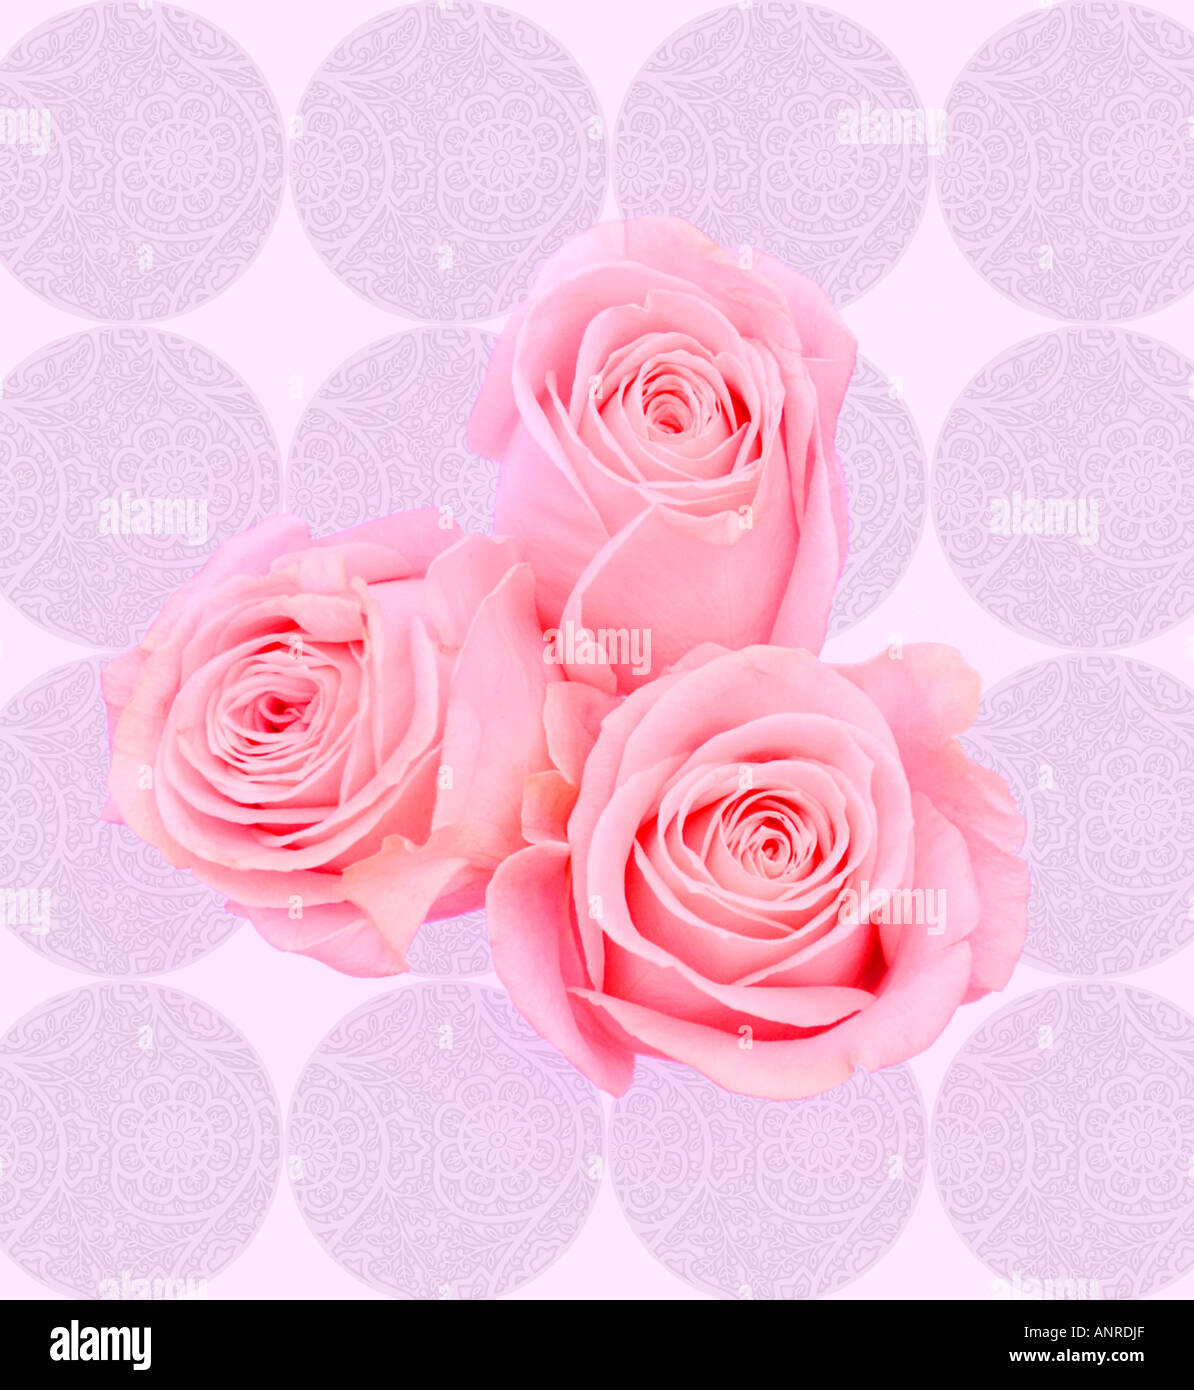 Three pink rose buds overlayed onto an illustrative background Stock Photo